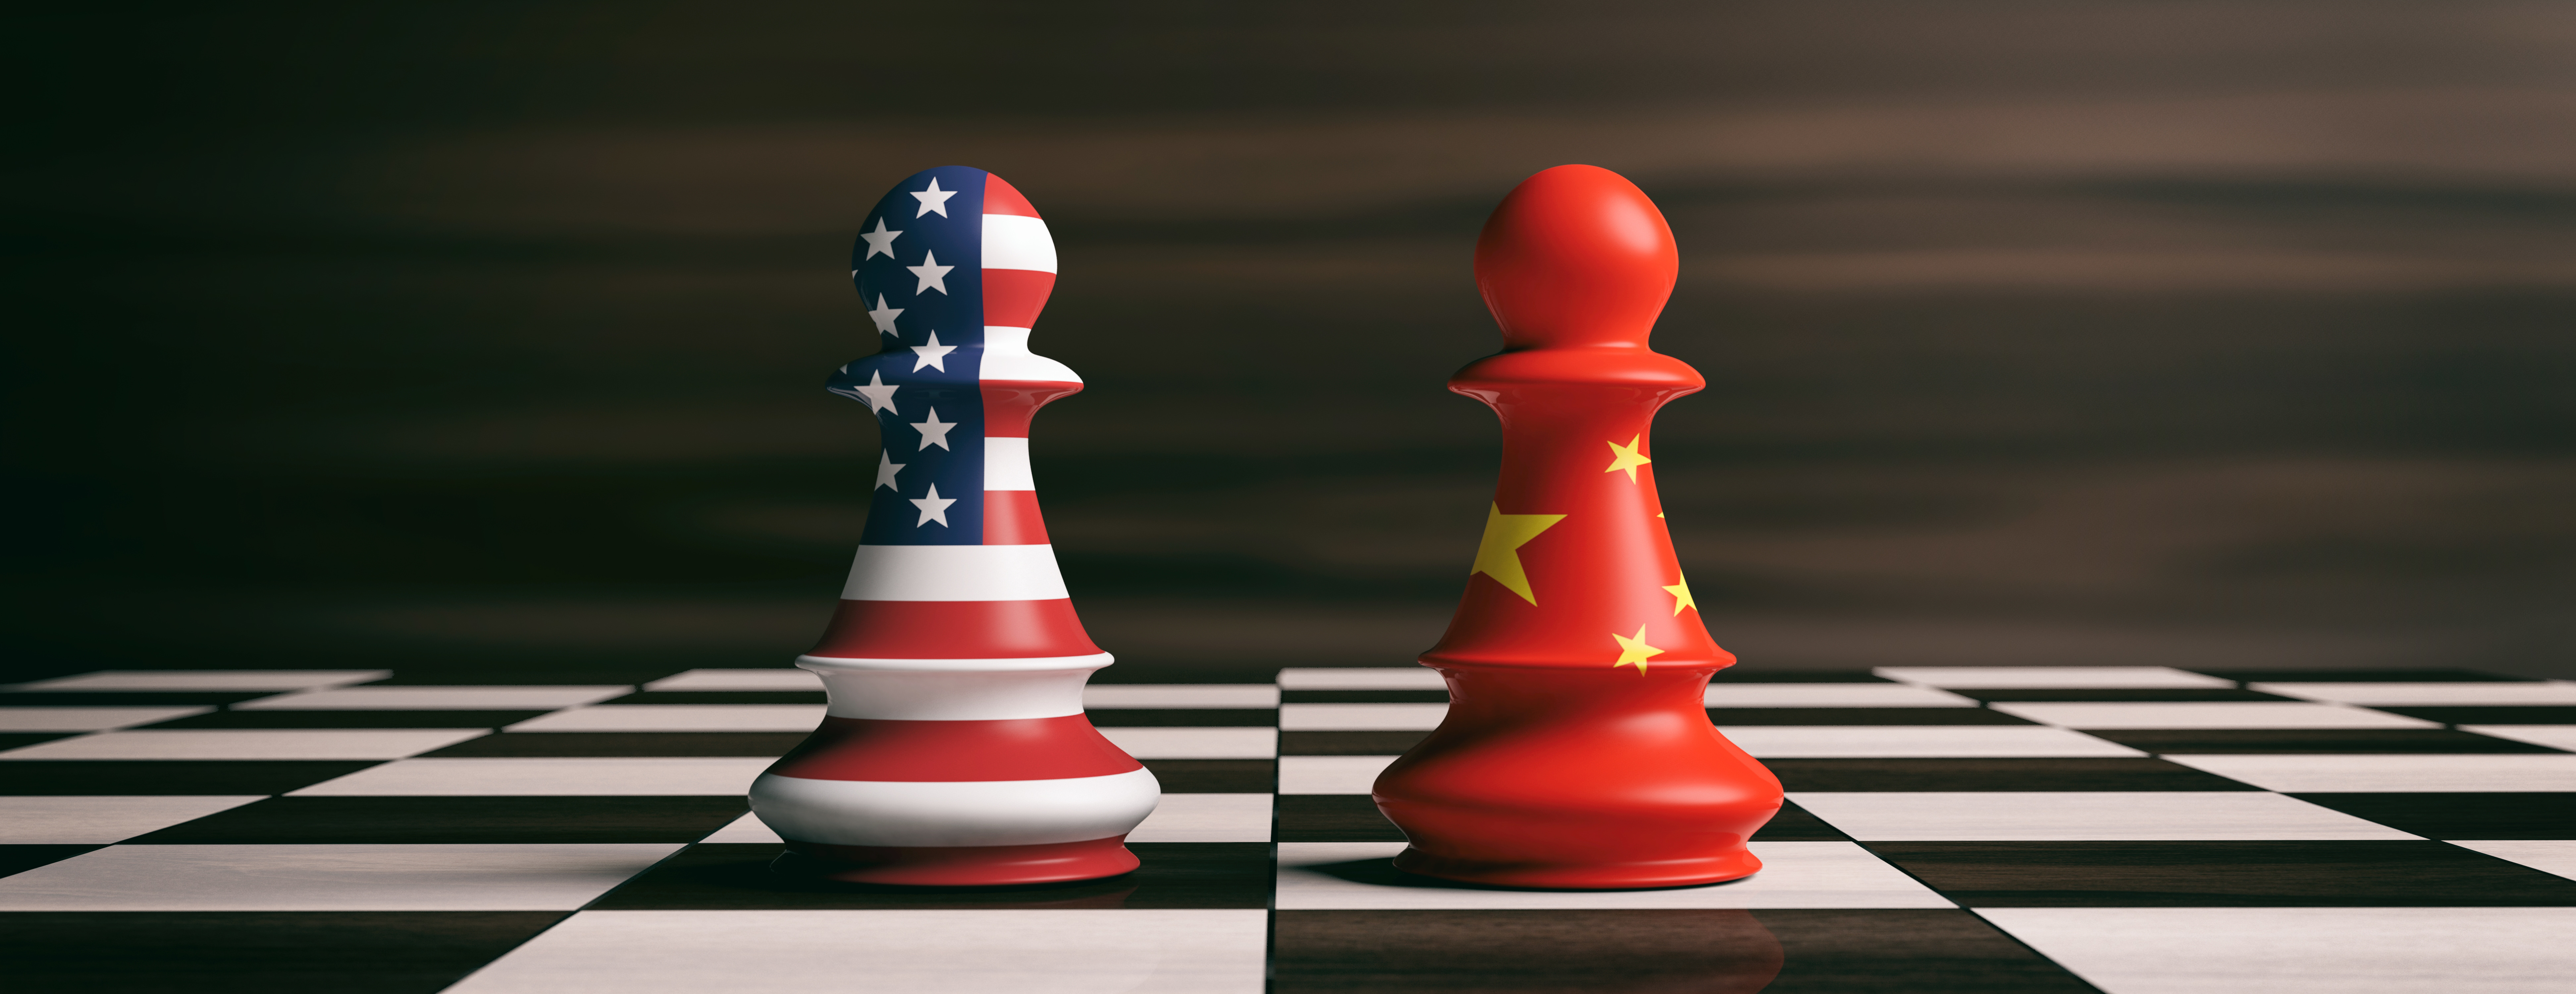 USA and China flags on chess pawns on a chessboard